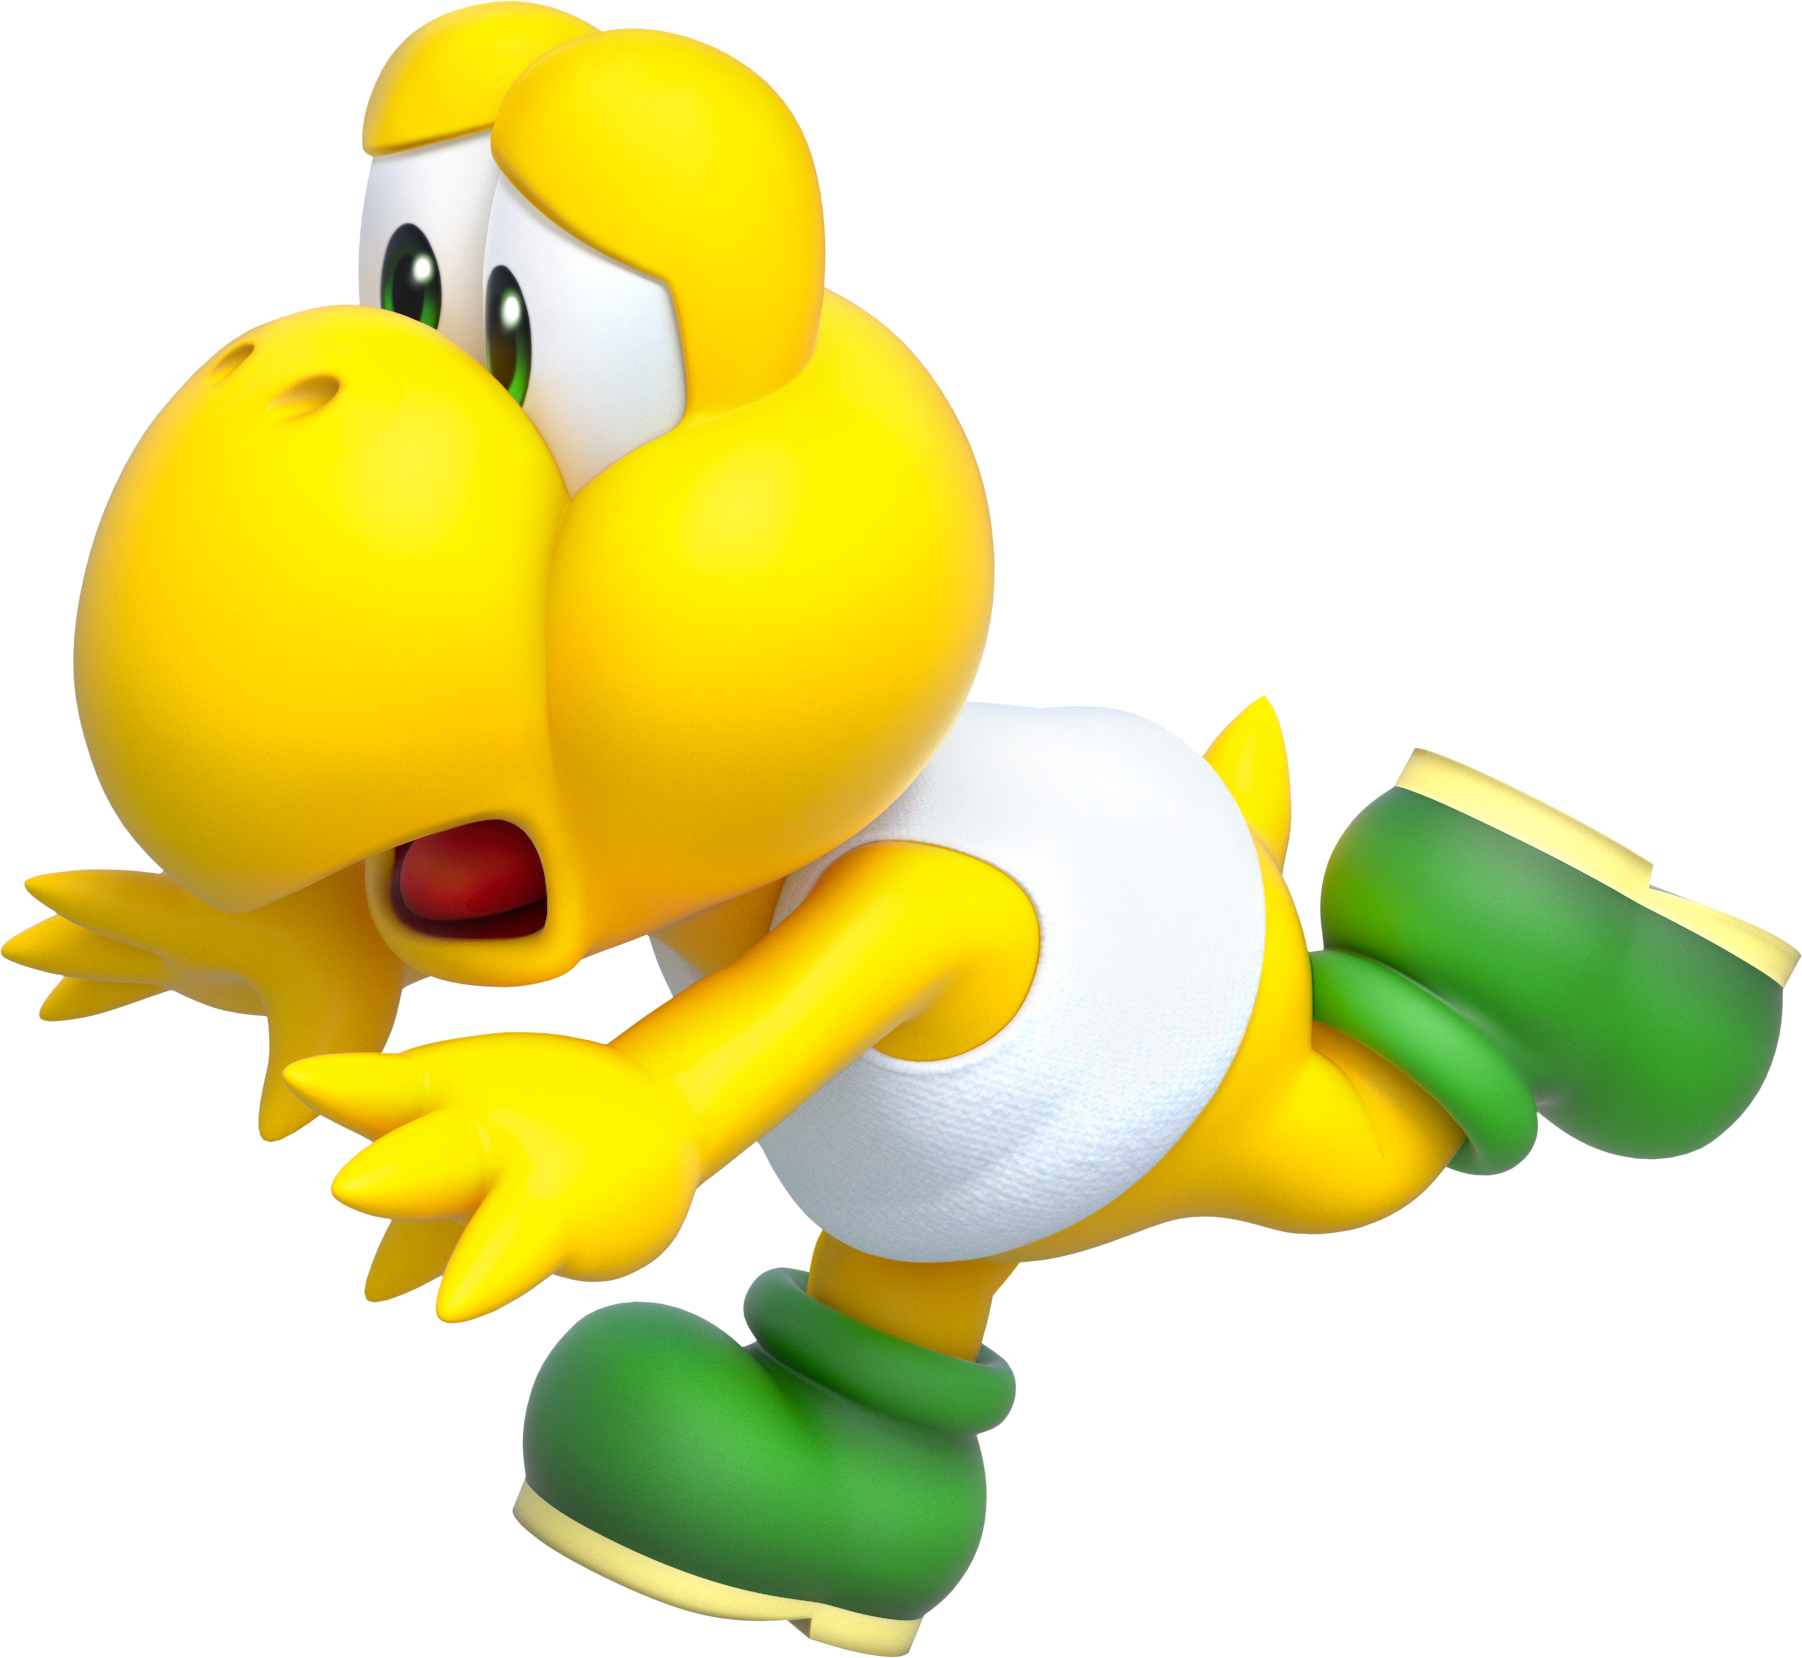 Galerry Fire Flower Mario Coloring Pages - Koopa Troopa Without Shell (1802x1658)